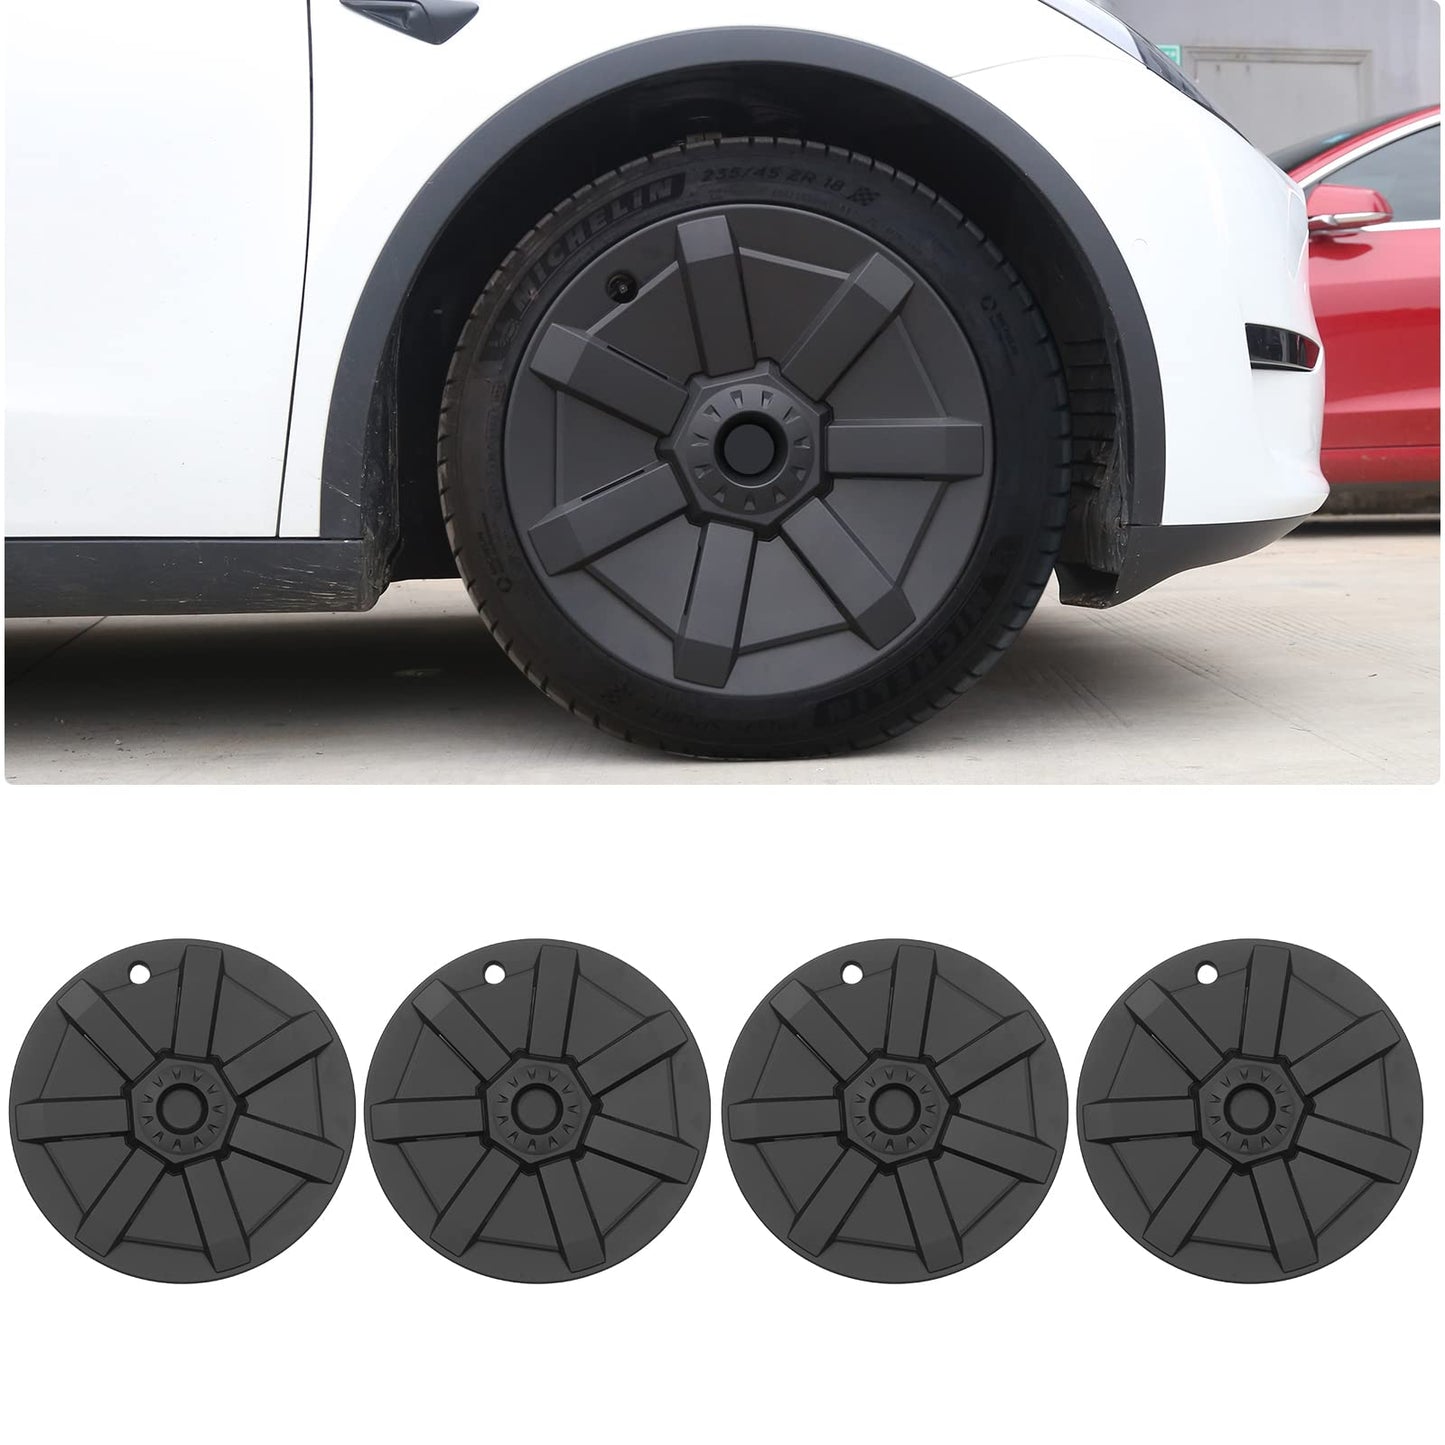 Evtesparts Model Y 19" Wheel Covers Cybertruck Style Hubcaps (Set of 4)